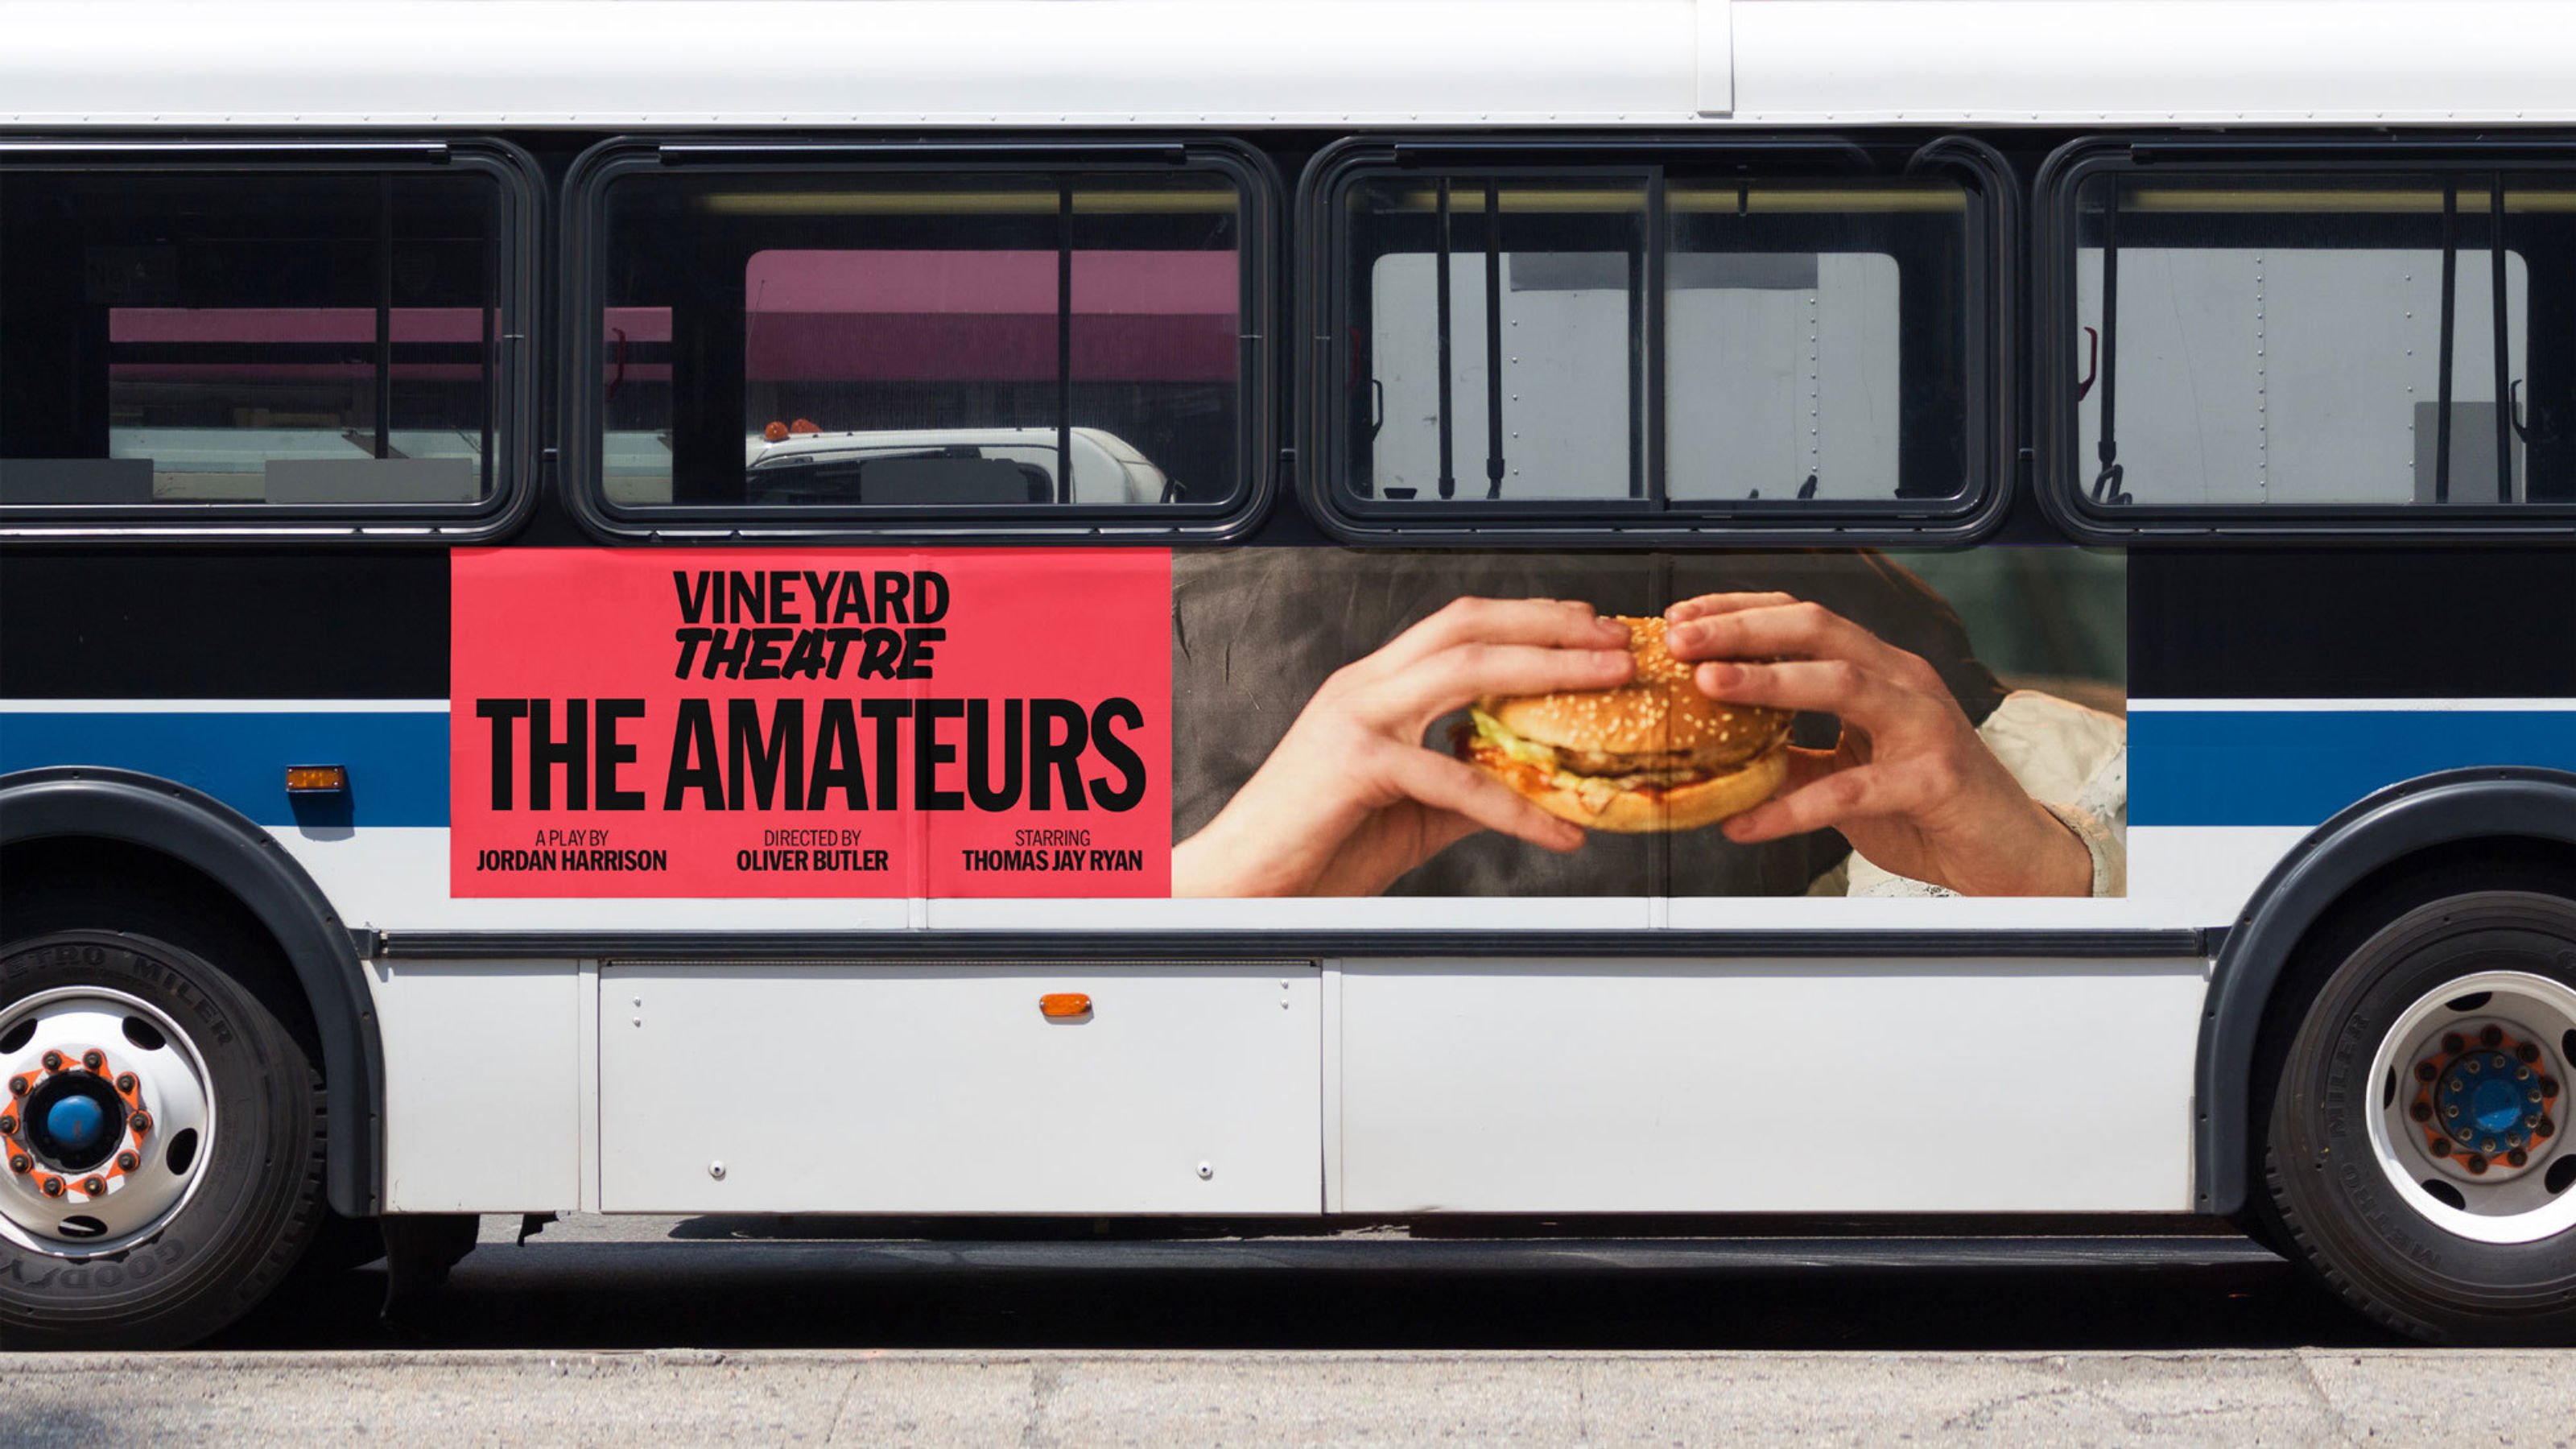 Brand identity and bus advert by London-based NB Studio for New York City's Vineyard Theatre